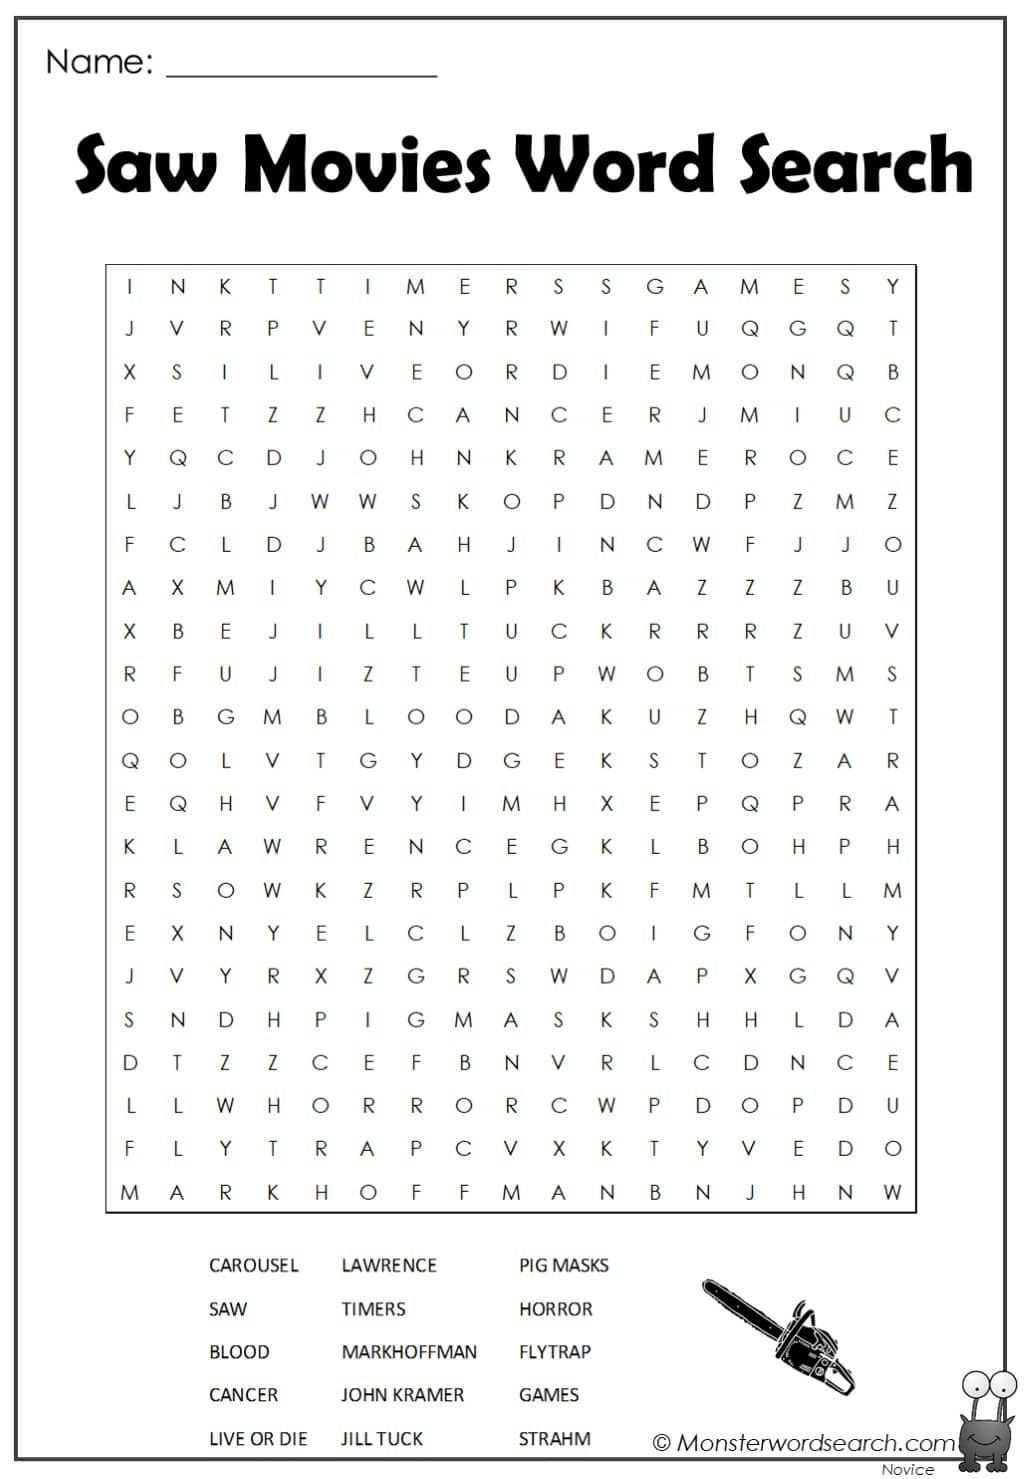 Saw Movies Word Search